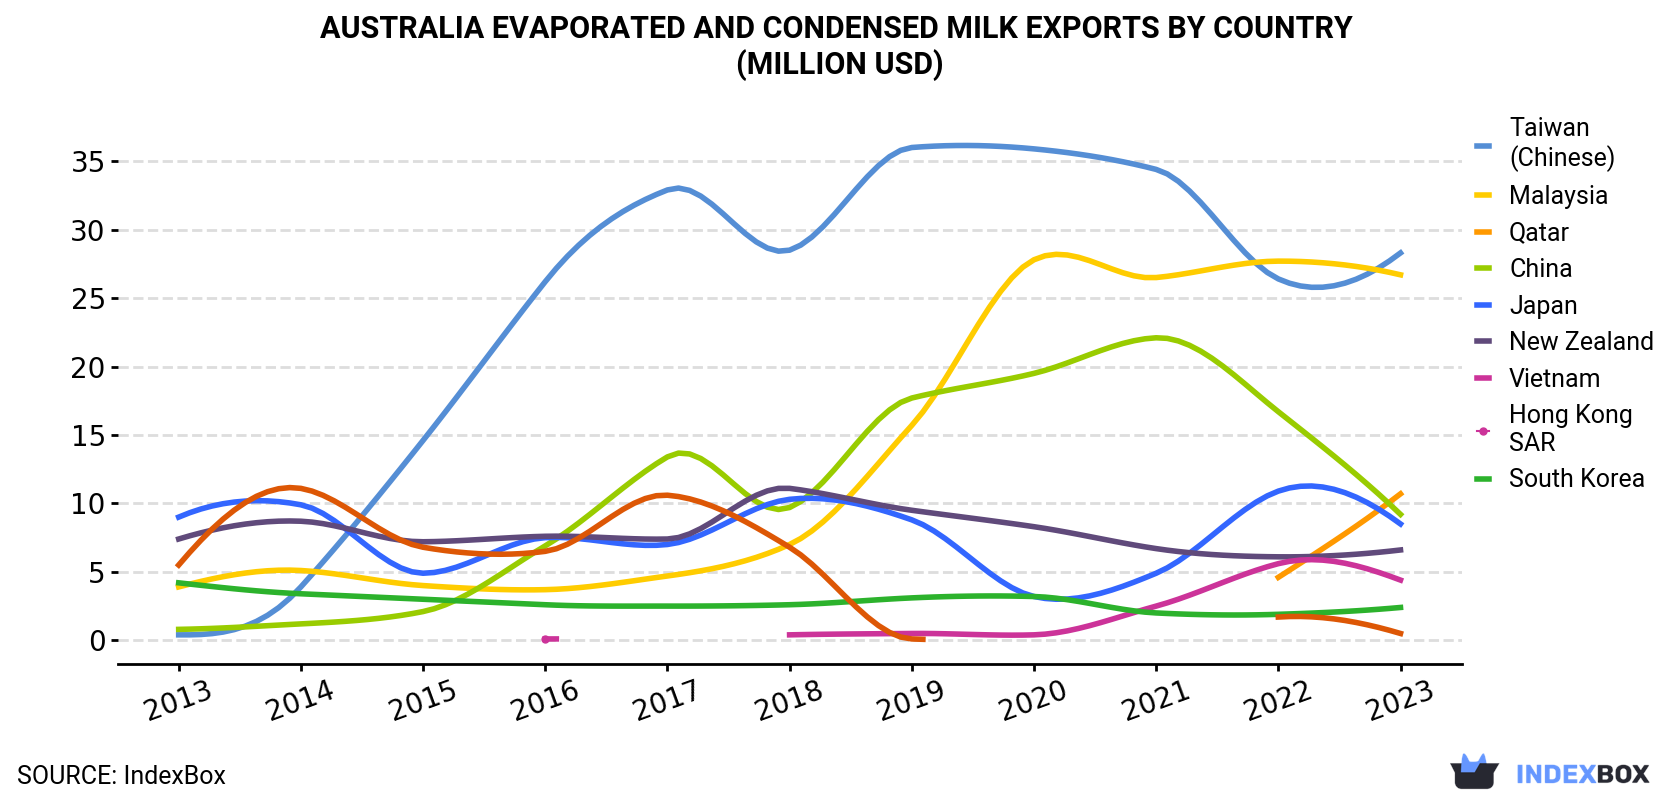 Australia Evaporated And Condensed Milk Exports By Country (Million USD)